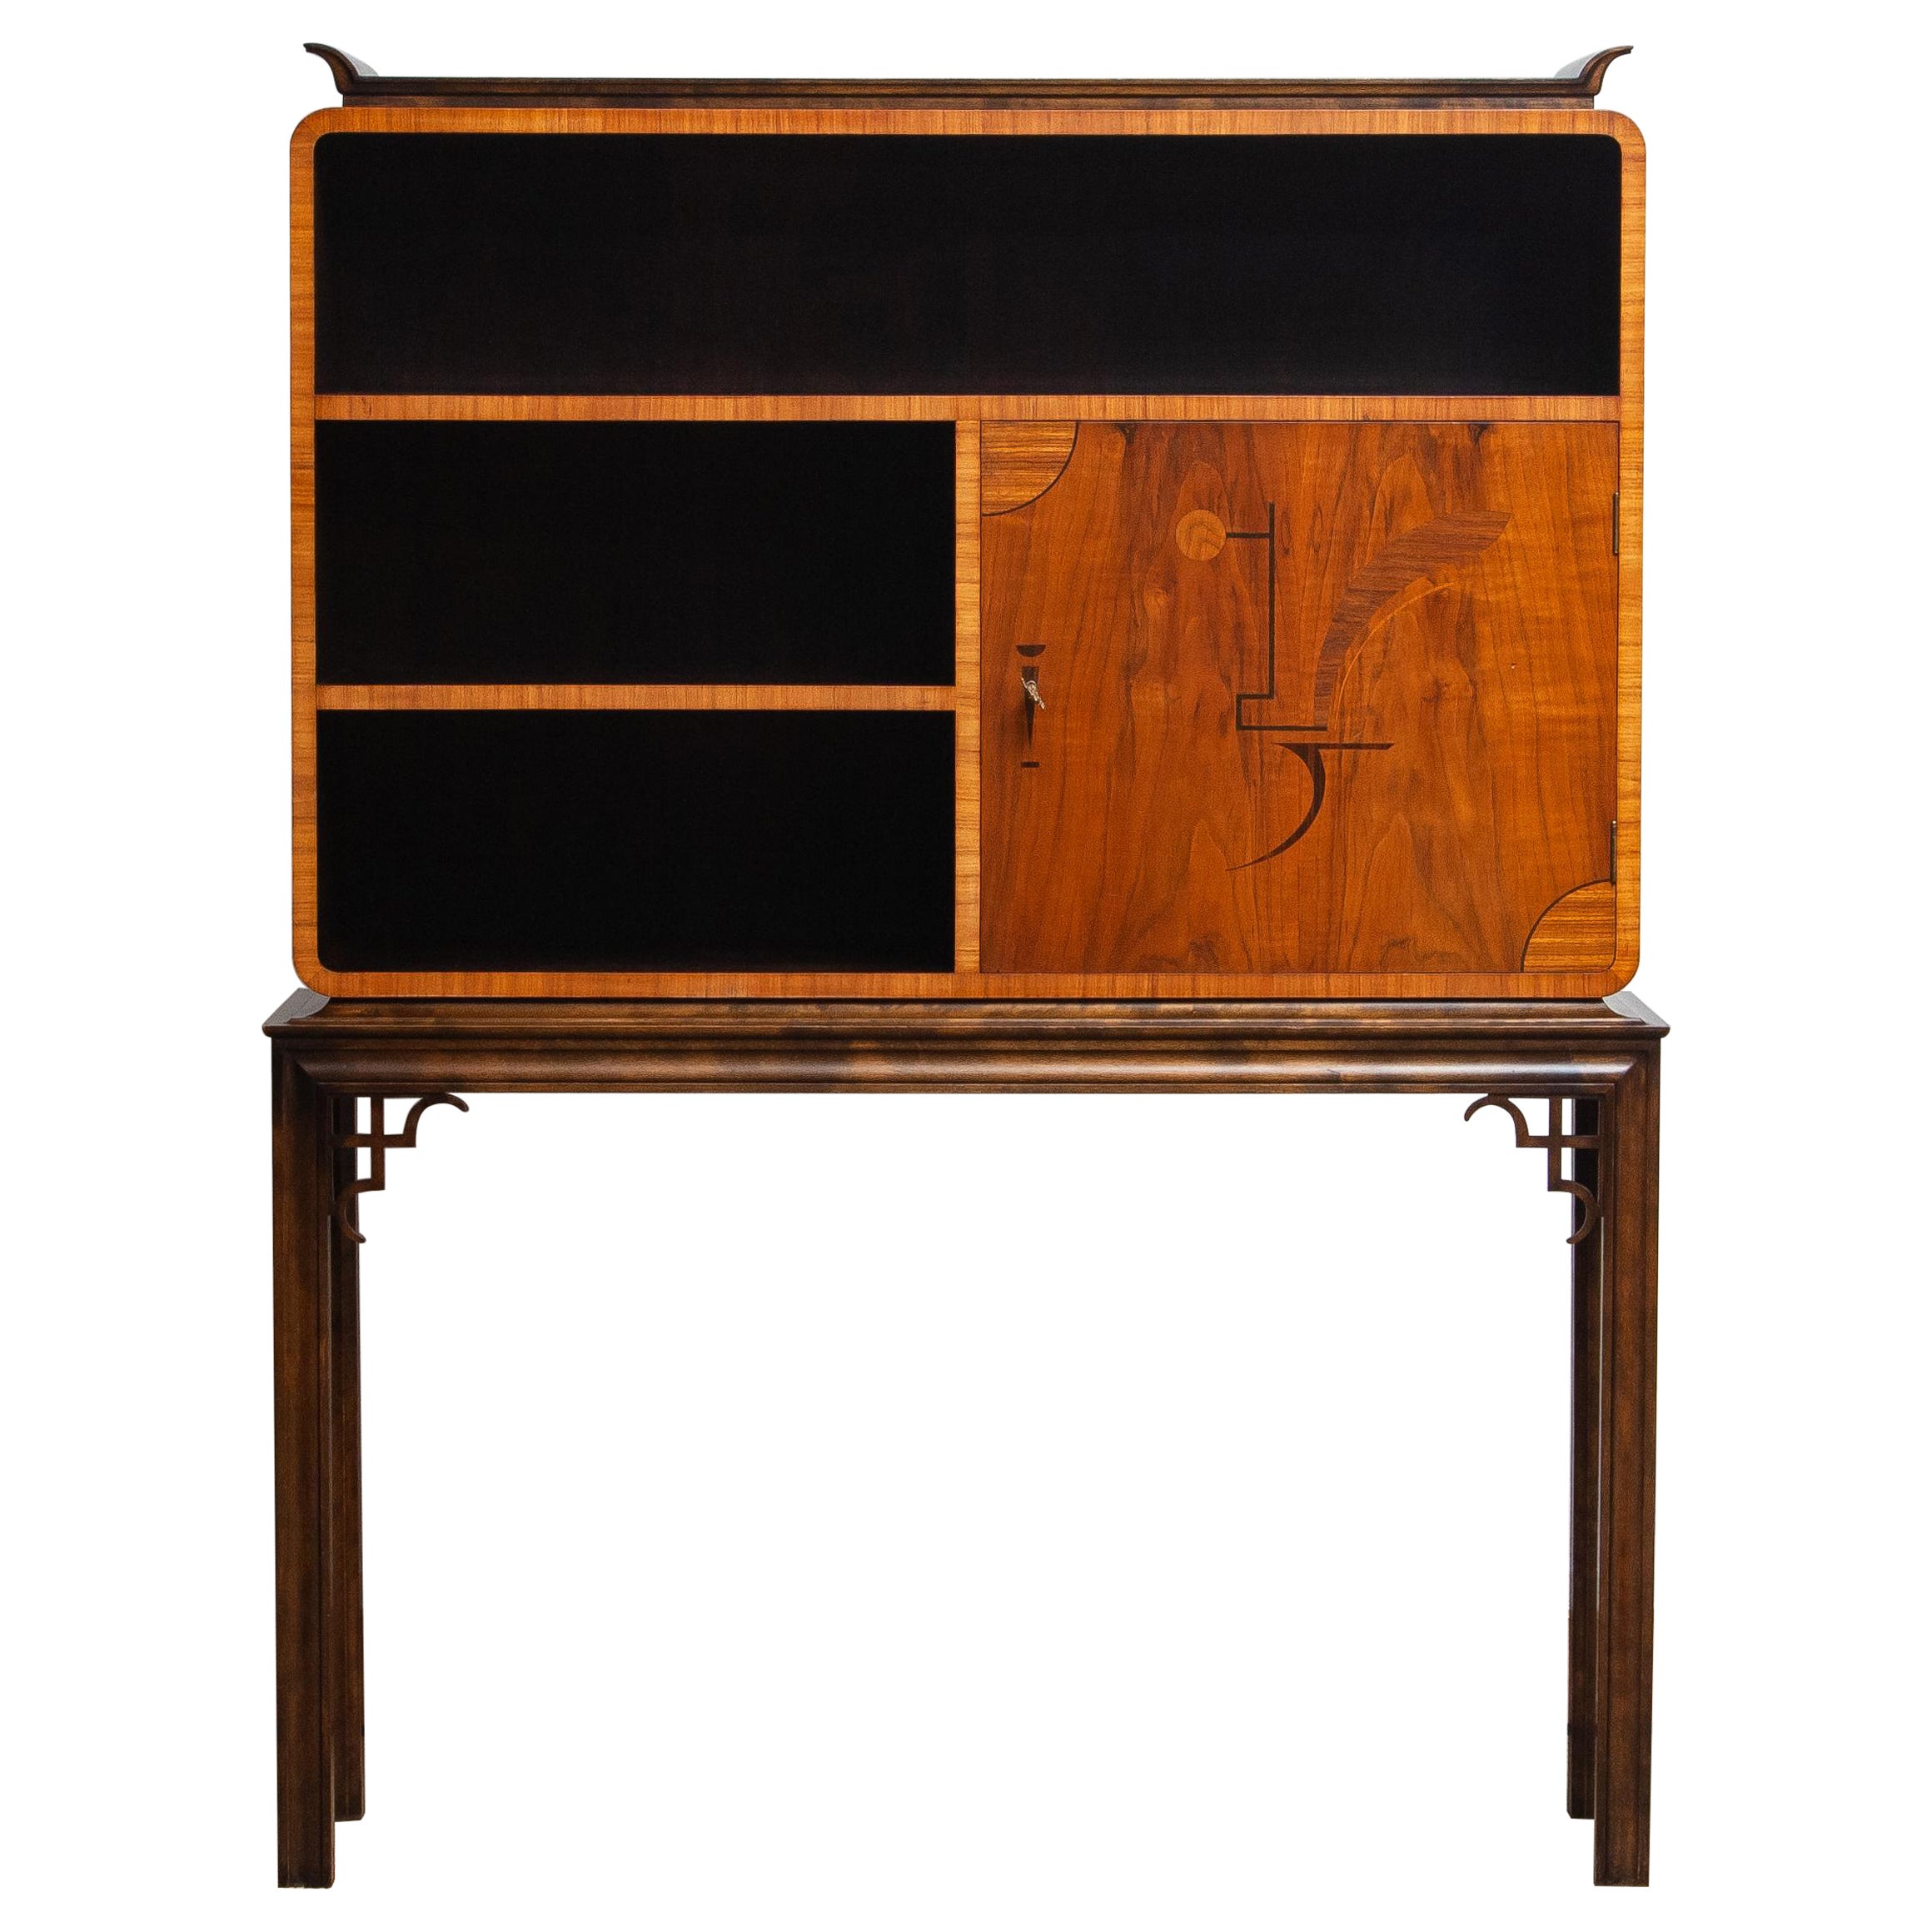 1930s, Swedish Art Deco Grace Cabinet / Dry Bar By Otto Wretling For Umea.